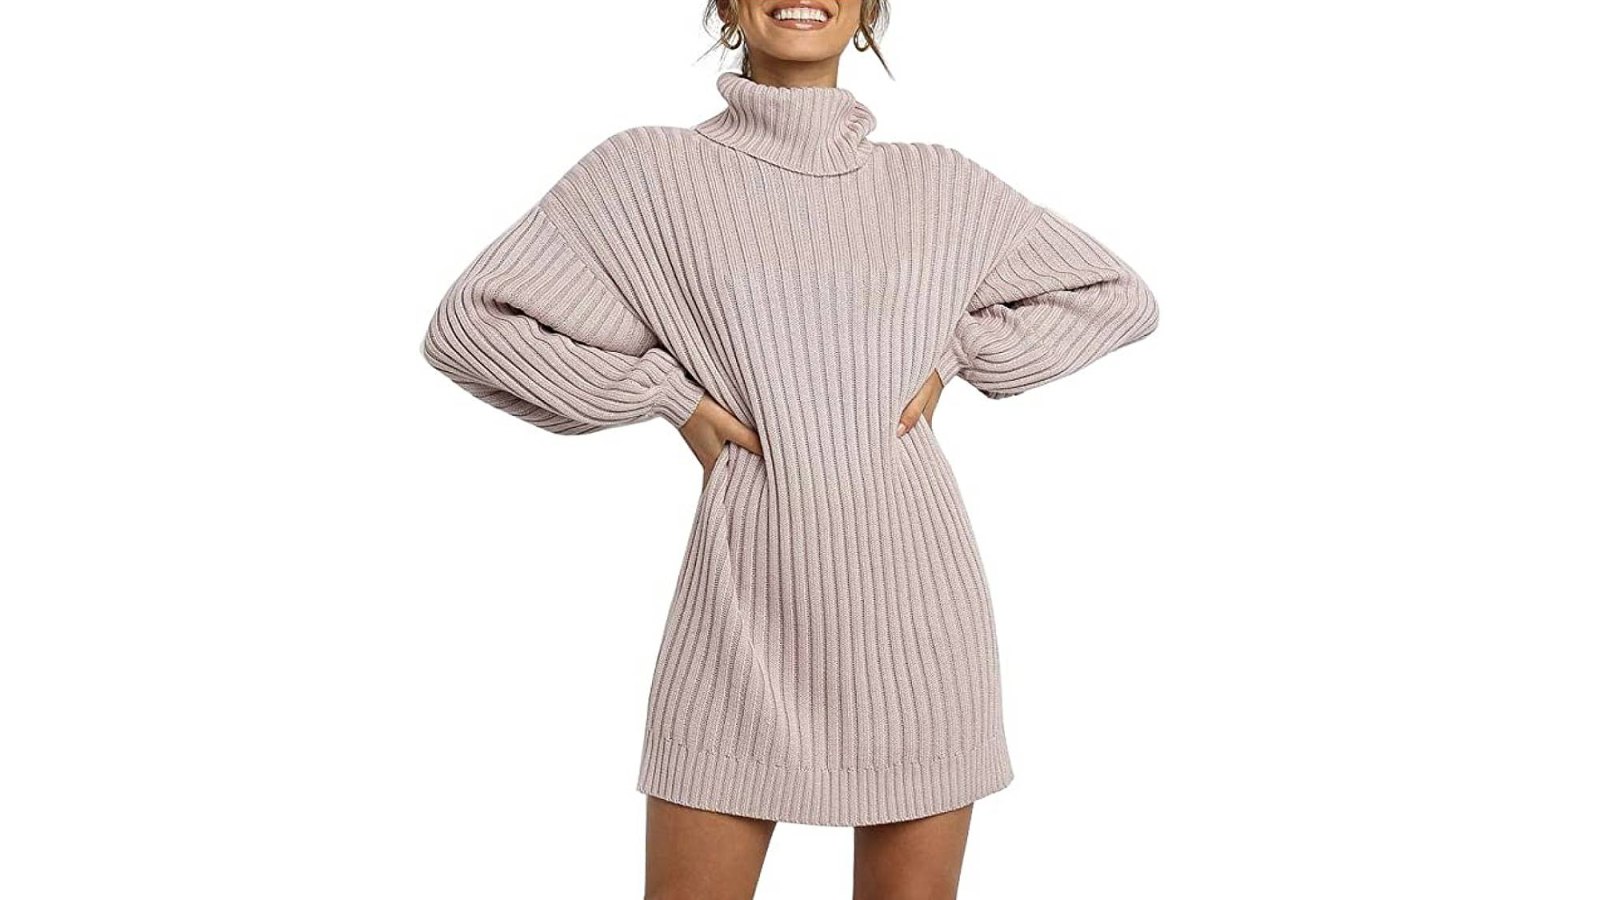 BLENCOT Women's Turtleneck Long Sleeve Chunky Cable Knit Sweater with Pockets